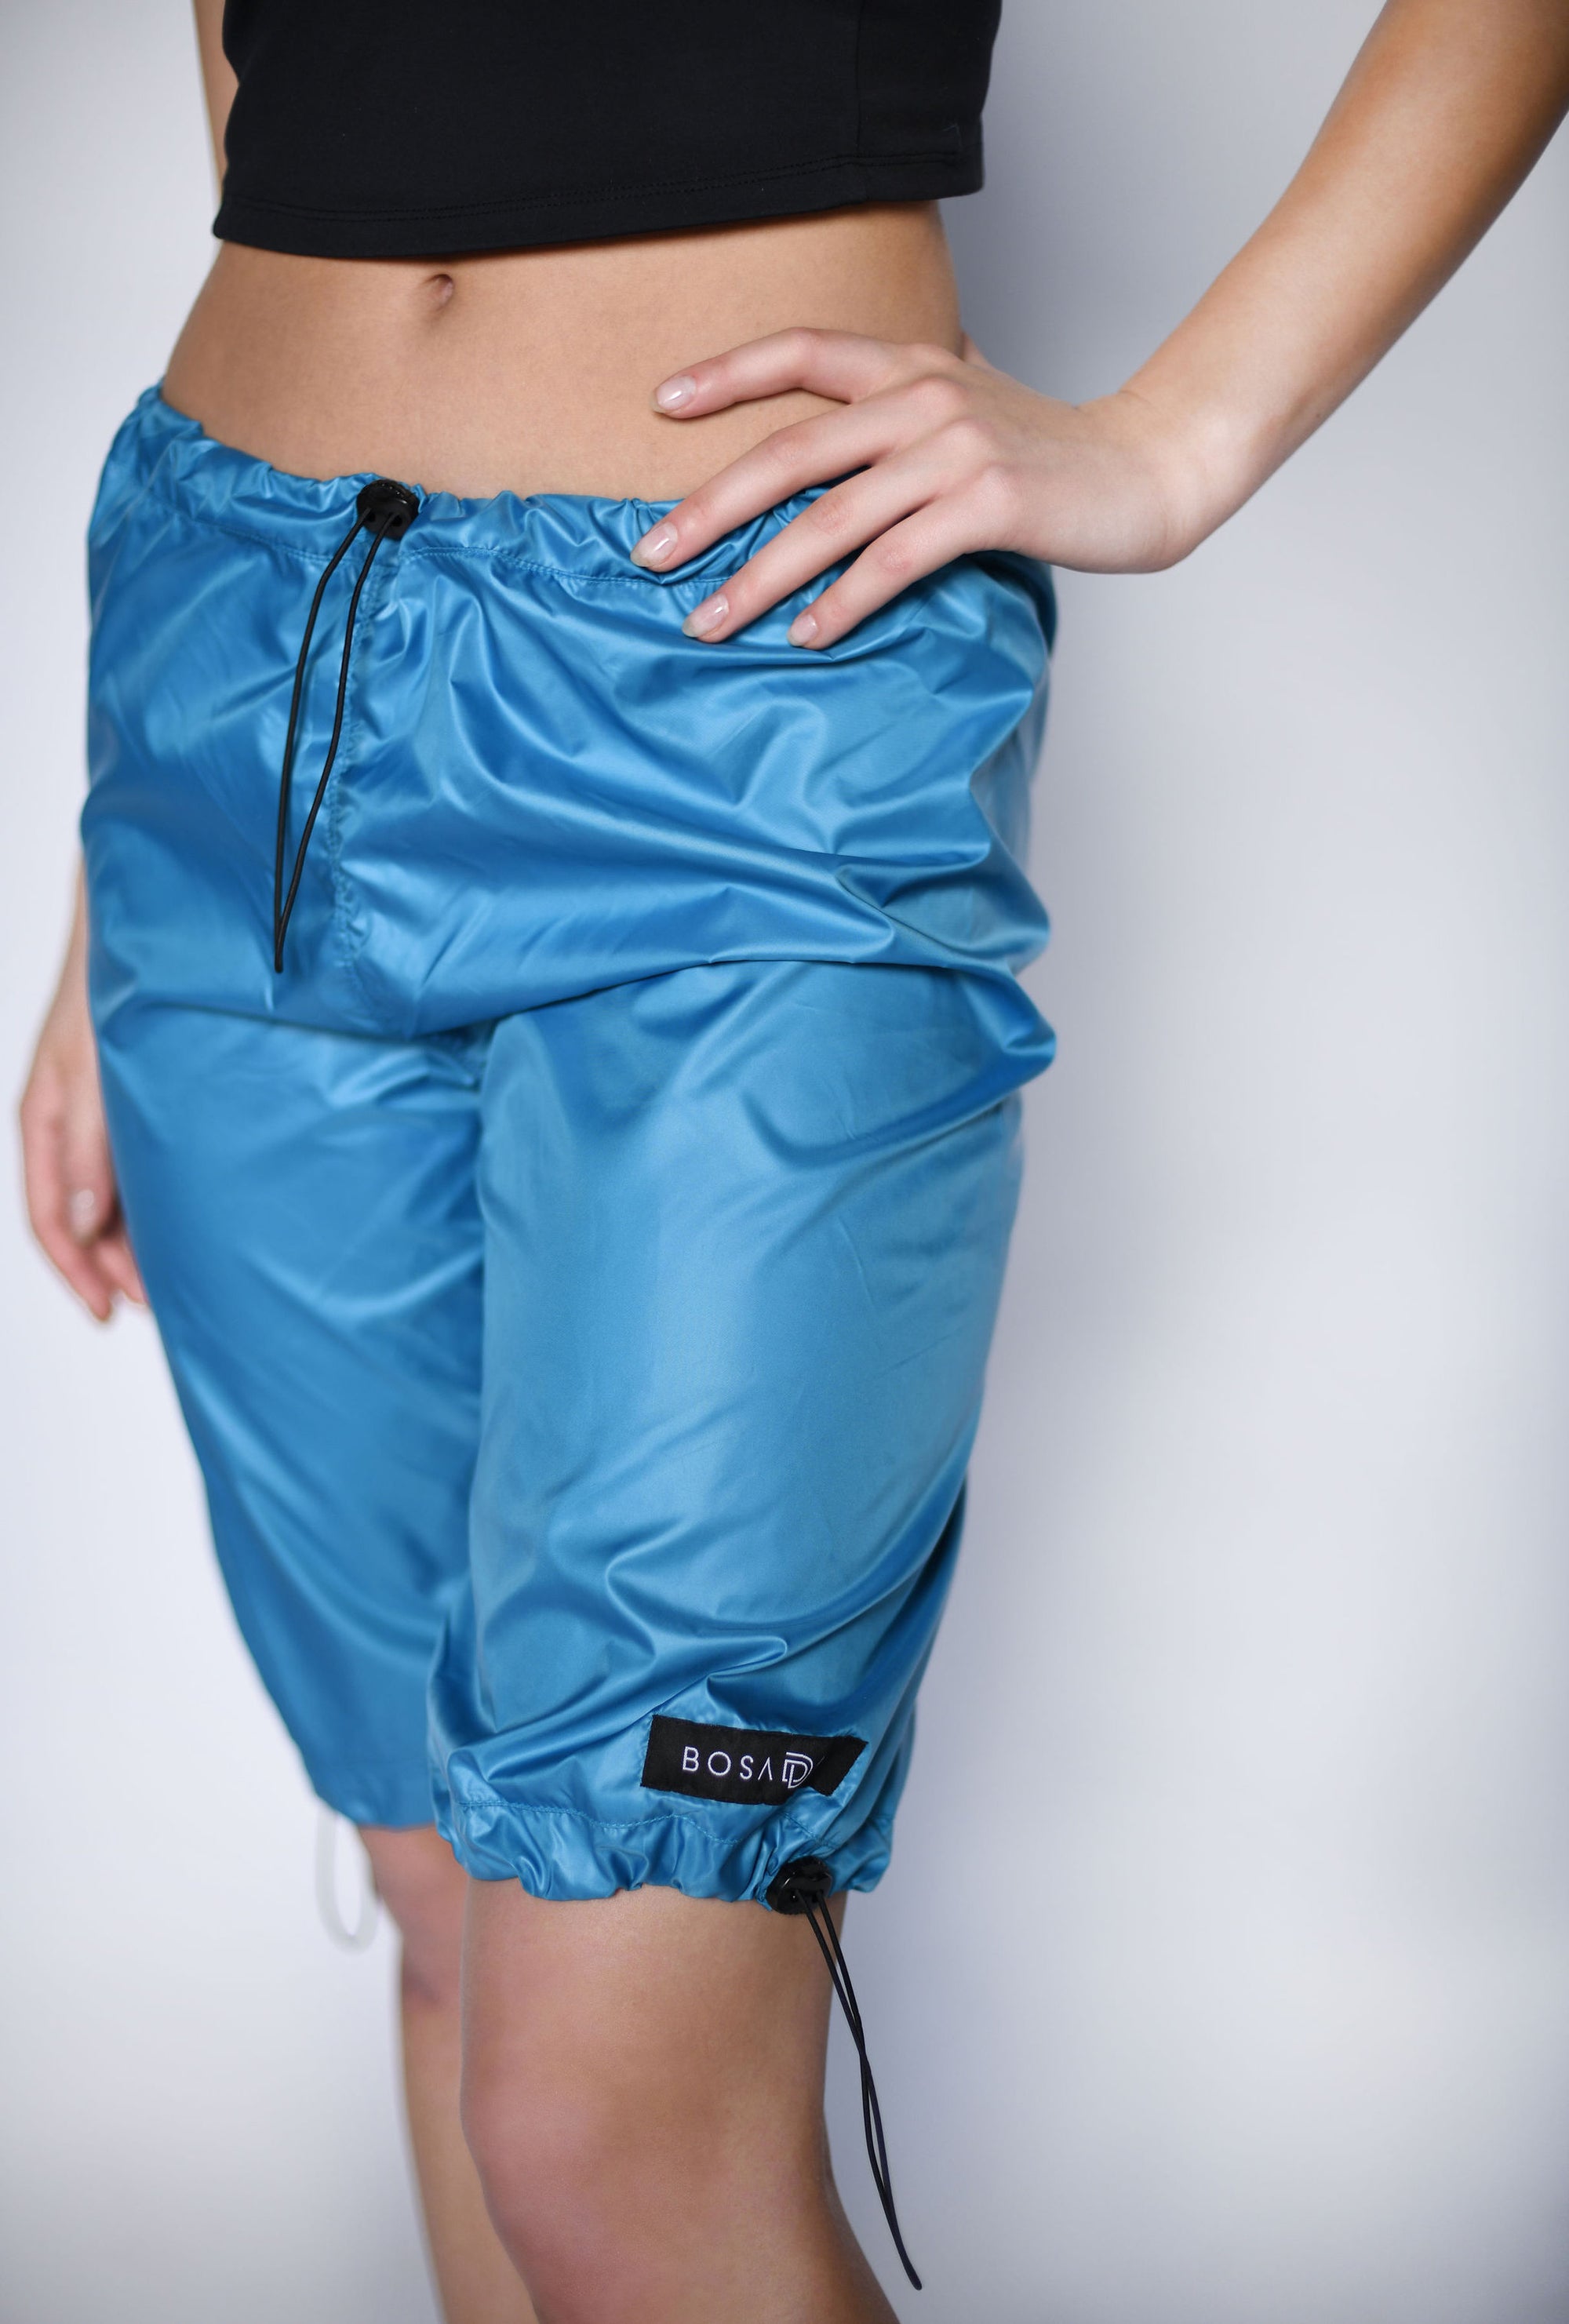 NEW URBAN SWAN COLLECTION S/S 23 | Ice blue long shorts